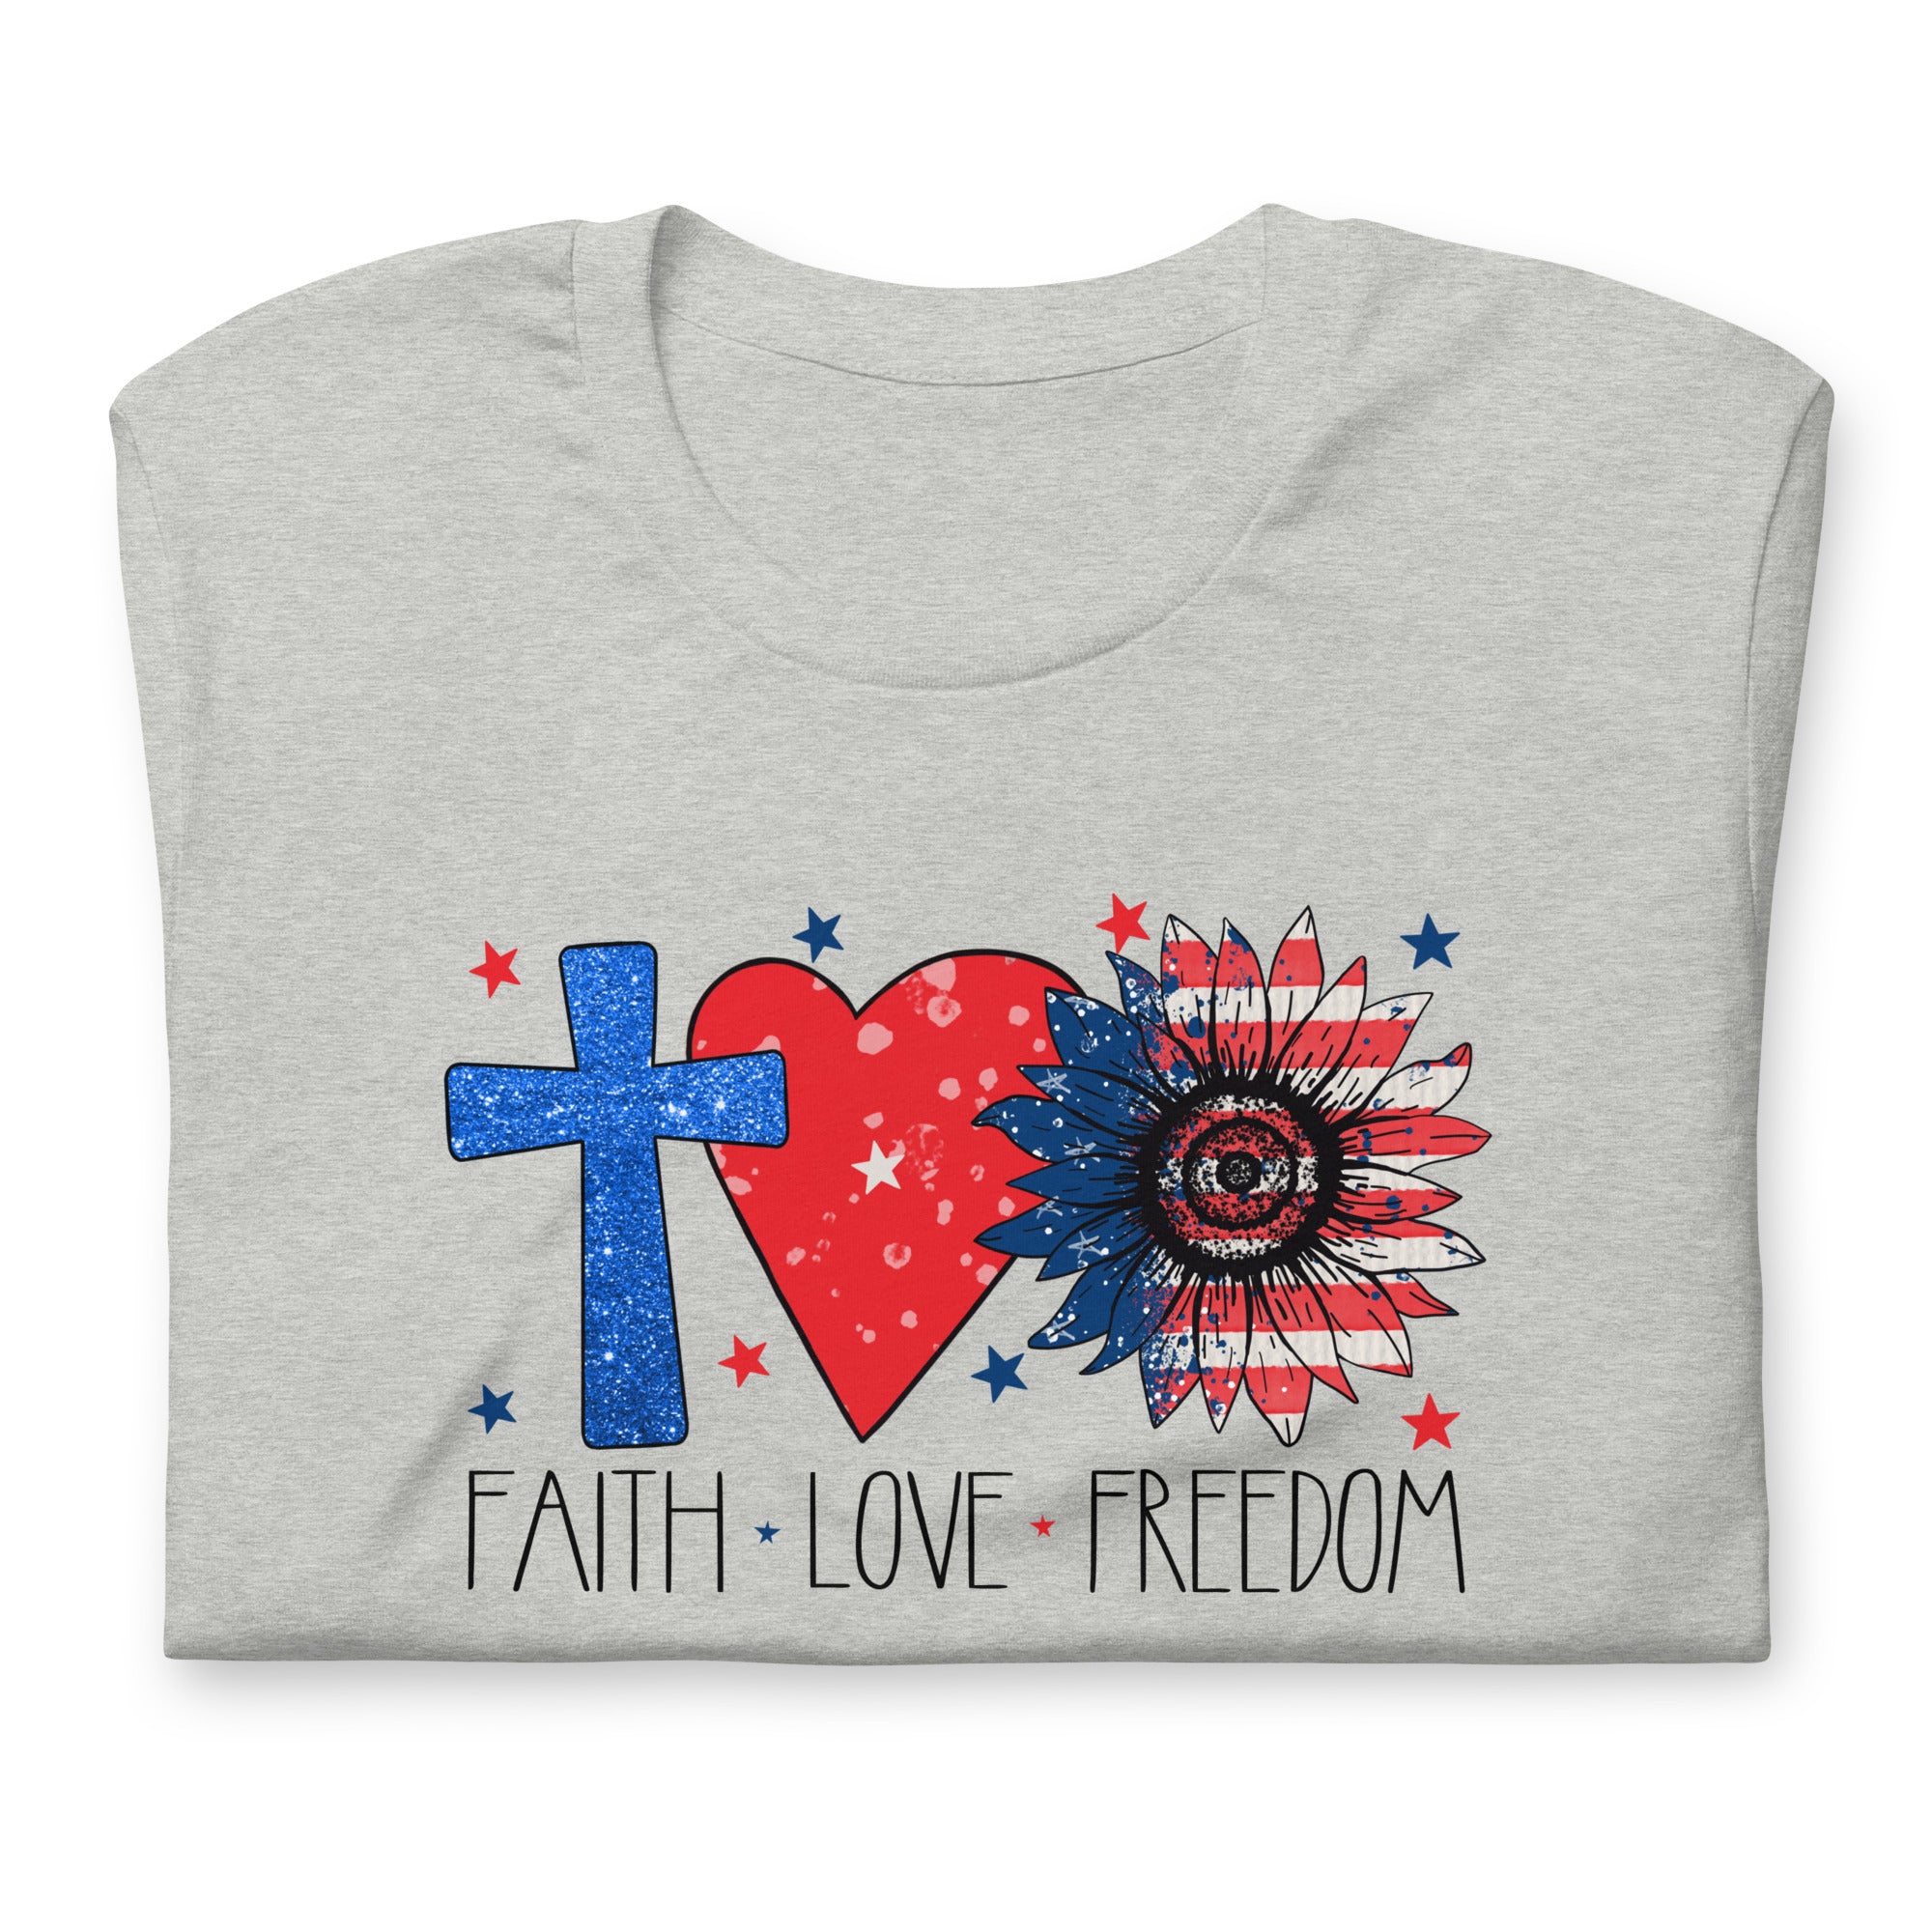 Faith Love and Freedom USA T-Shirt for America's Independence on the4th of July